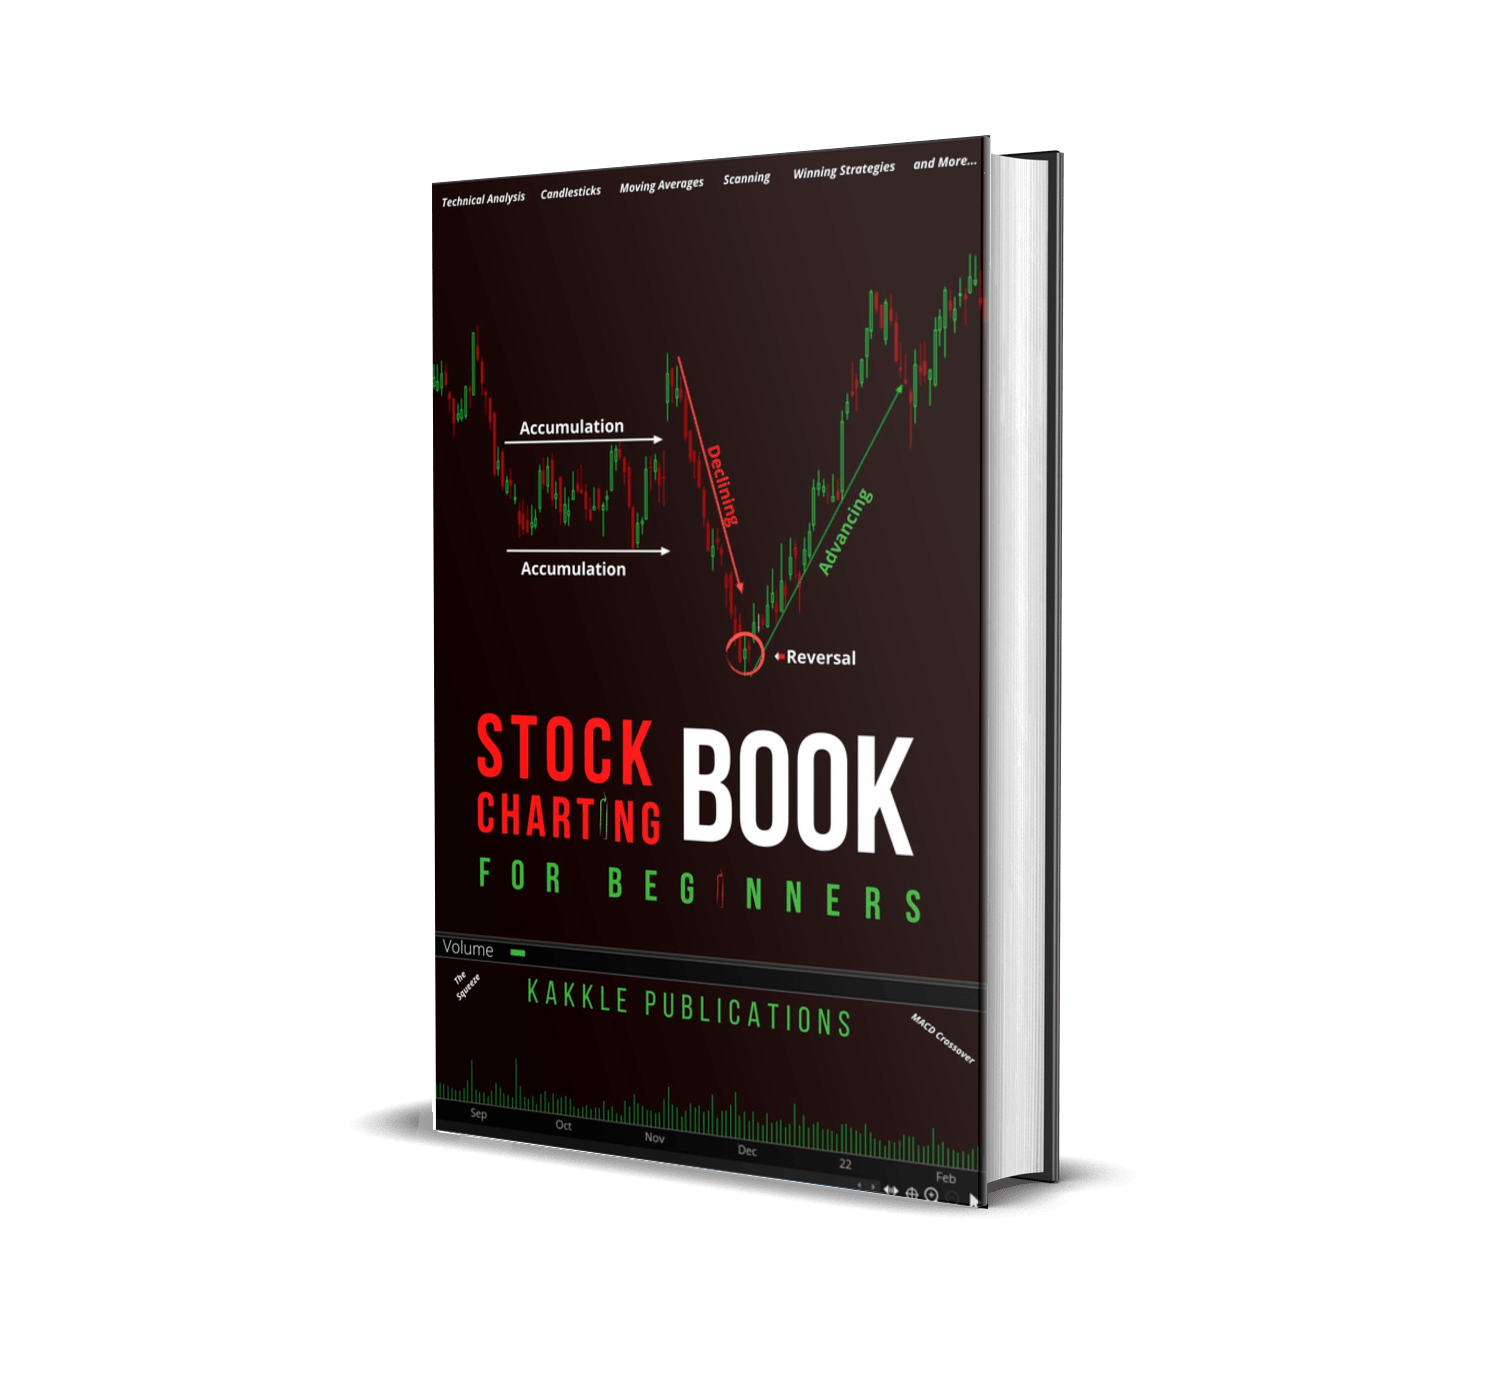 stock-charting-book-for-beginners-welcome